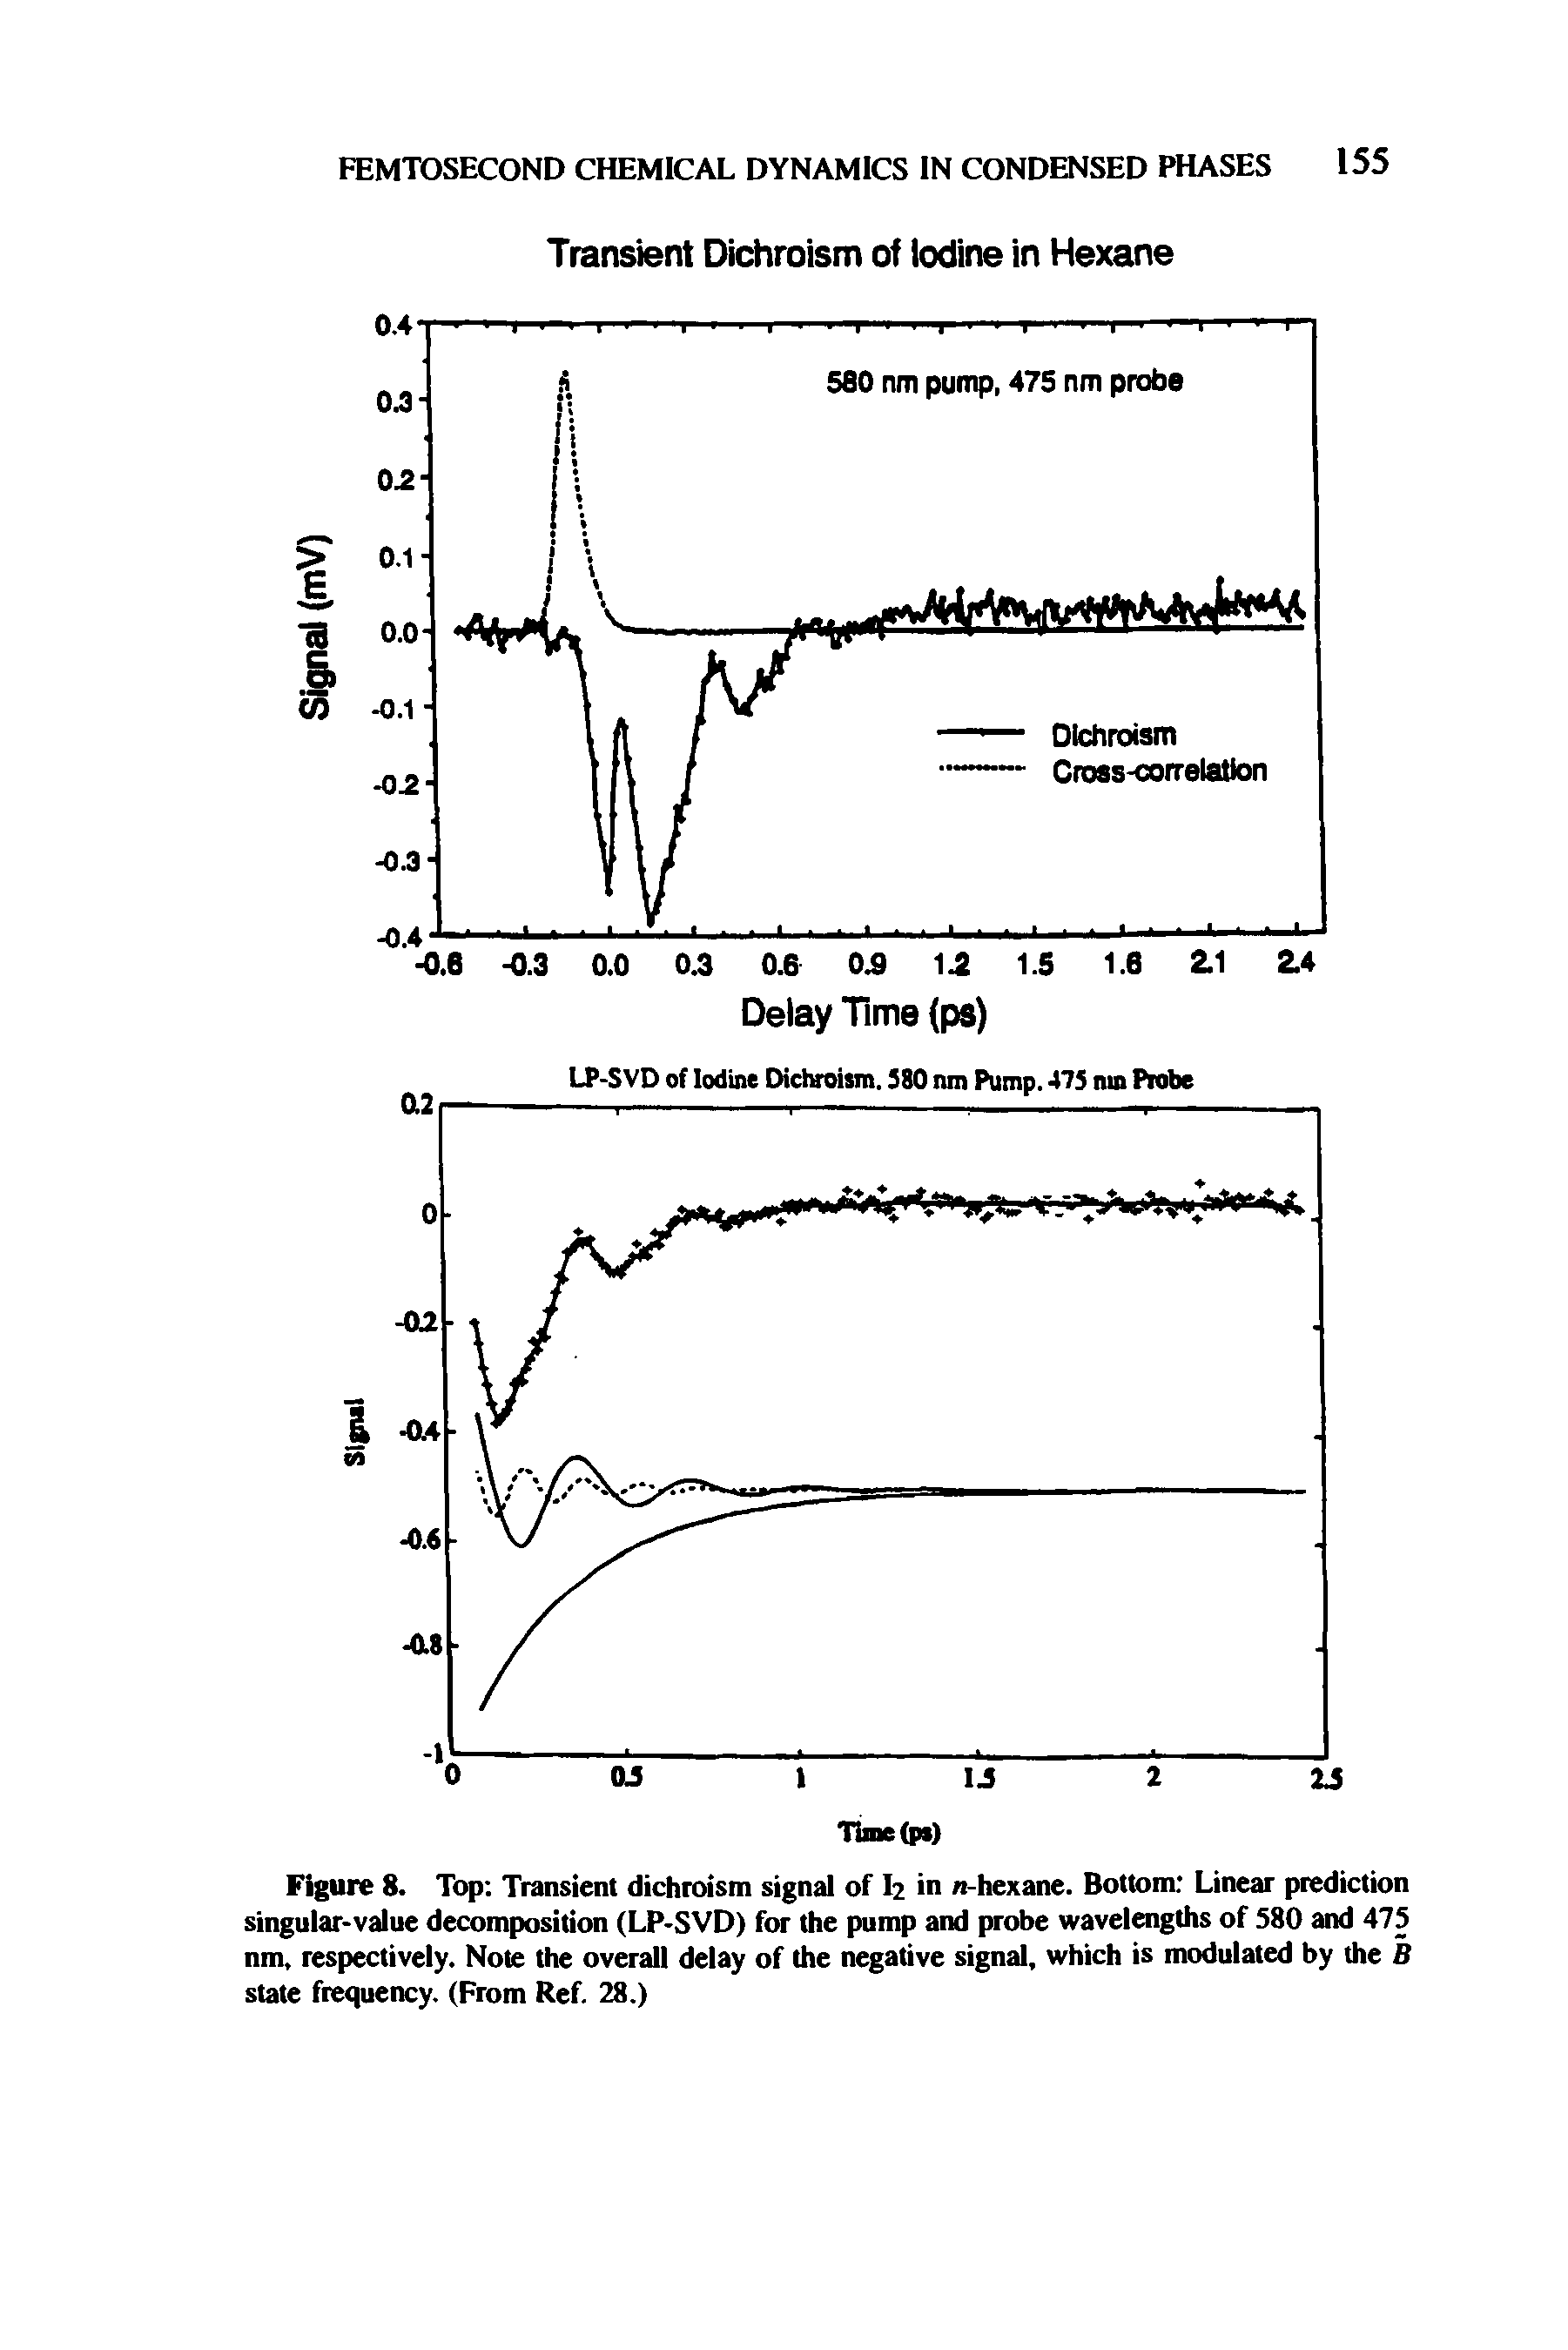 Figure 8. Top Transient dichroism signal of I2 in n-hexane. Bottom Linear prediction singular-value decomposition (LP-SVD) for the pump and probe wavelengths of 580 and 475 nm, respectively. Note the overall delay of the negative signal, which is modulated by the B state frequency. (From Ref. 28.)...